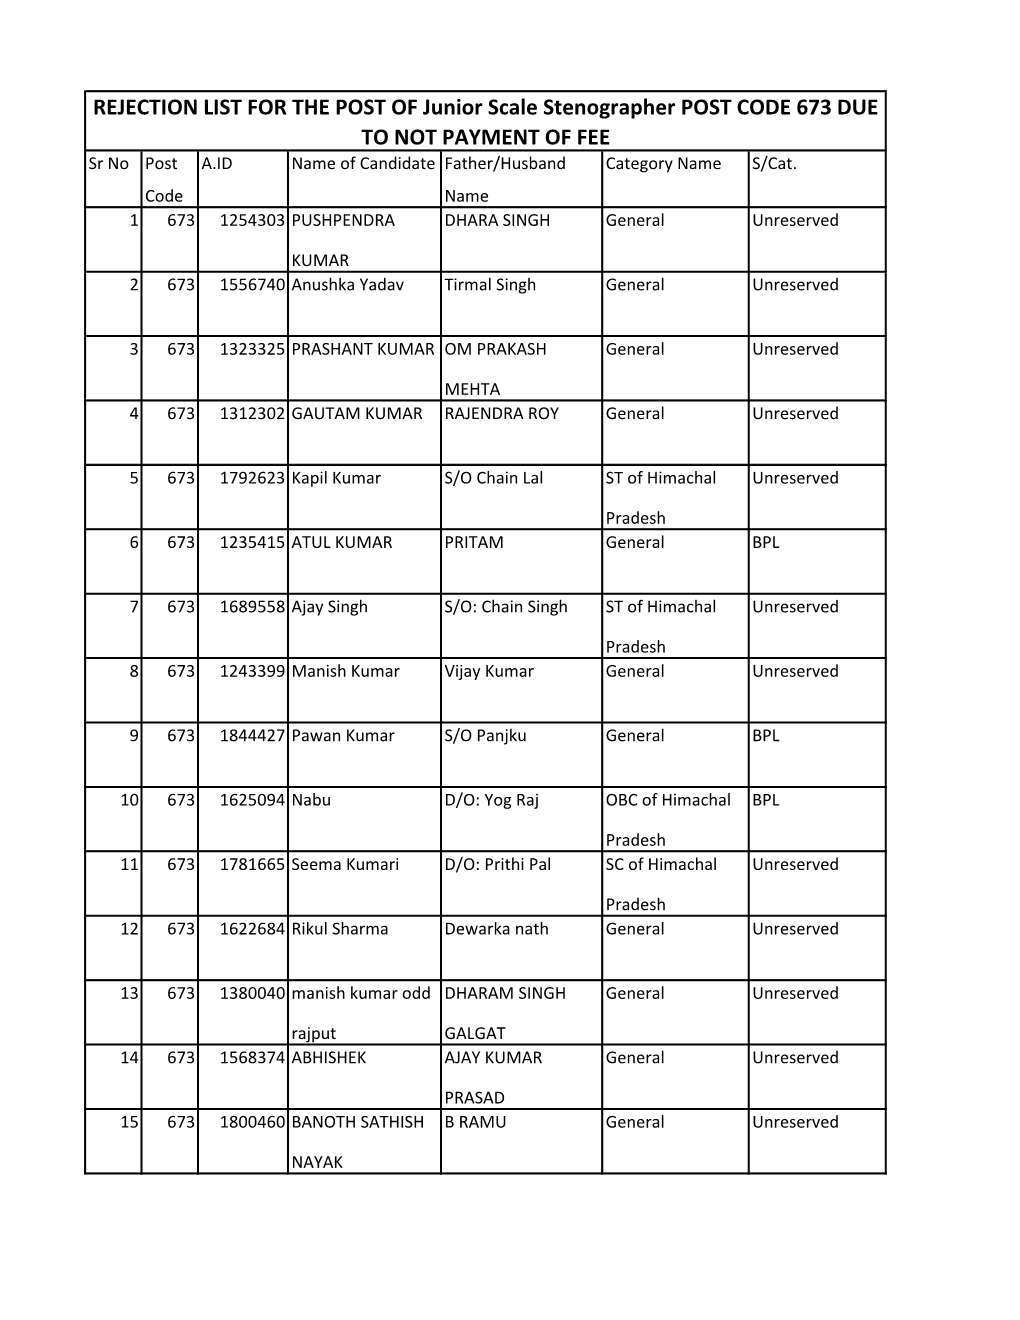 REJECTION LIST for the POST of Junior Scale Stenographer POST CODE 673 DUE to NOT PAYMENT of FEE Sr No Post A.ID Name of Candidate Father/Husband Category Name S/Cat